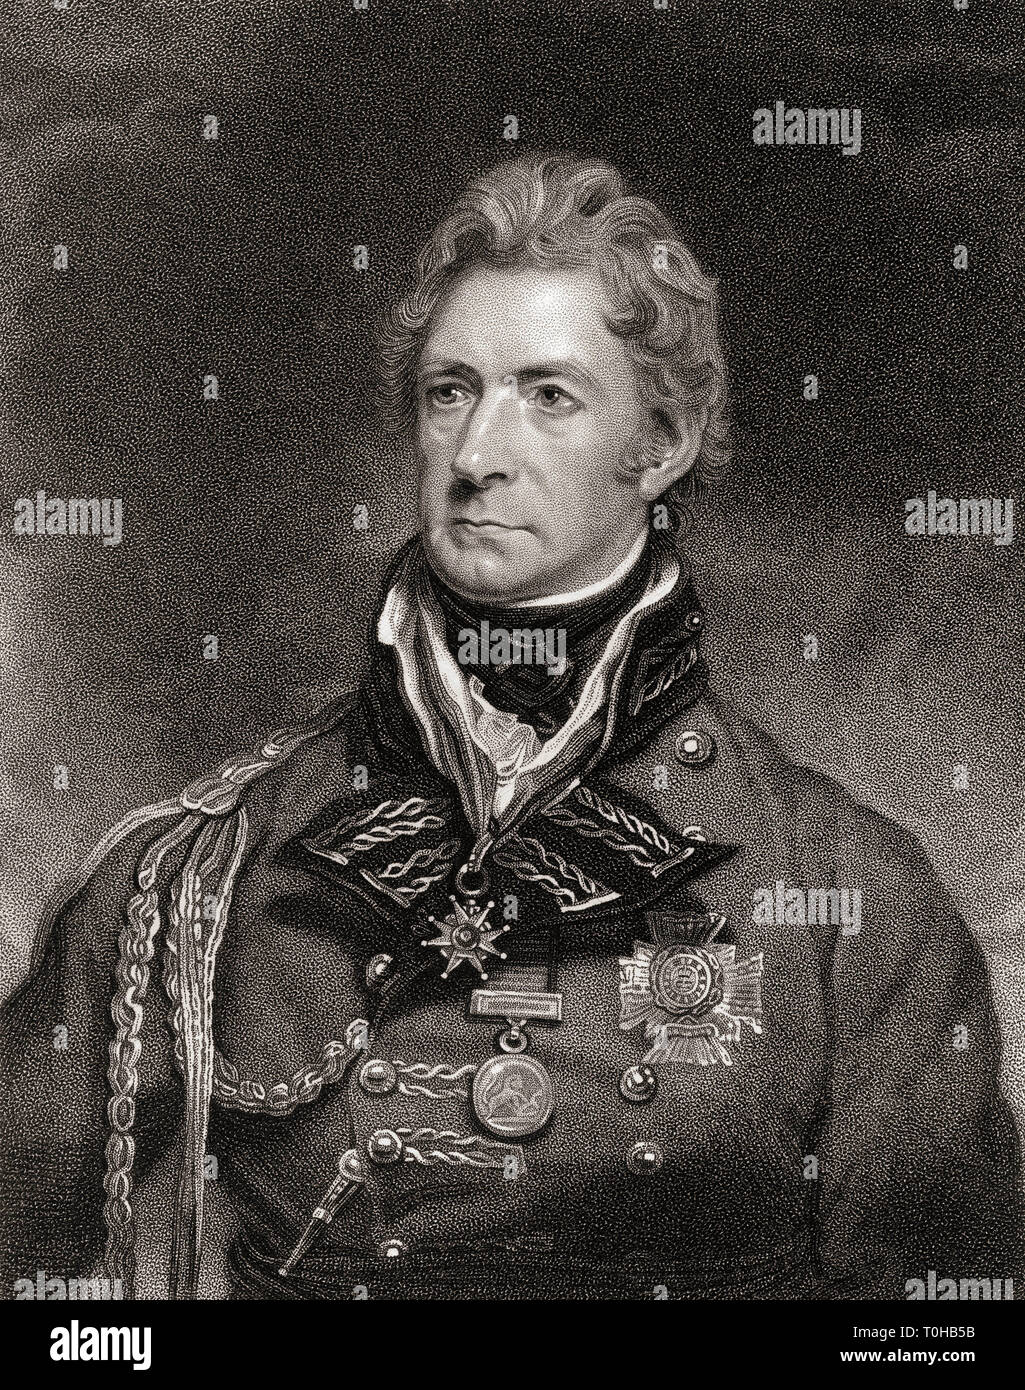 Sir Thomas Munro, 1st Baronet, Former Governor of Madras, Major General Sir Thomas Munro, British soldier and colonial administrator, Chennai, India, Asia, old vintage 1800s picture Stock Photo